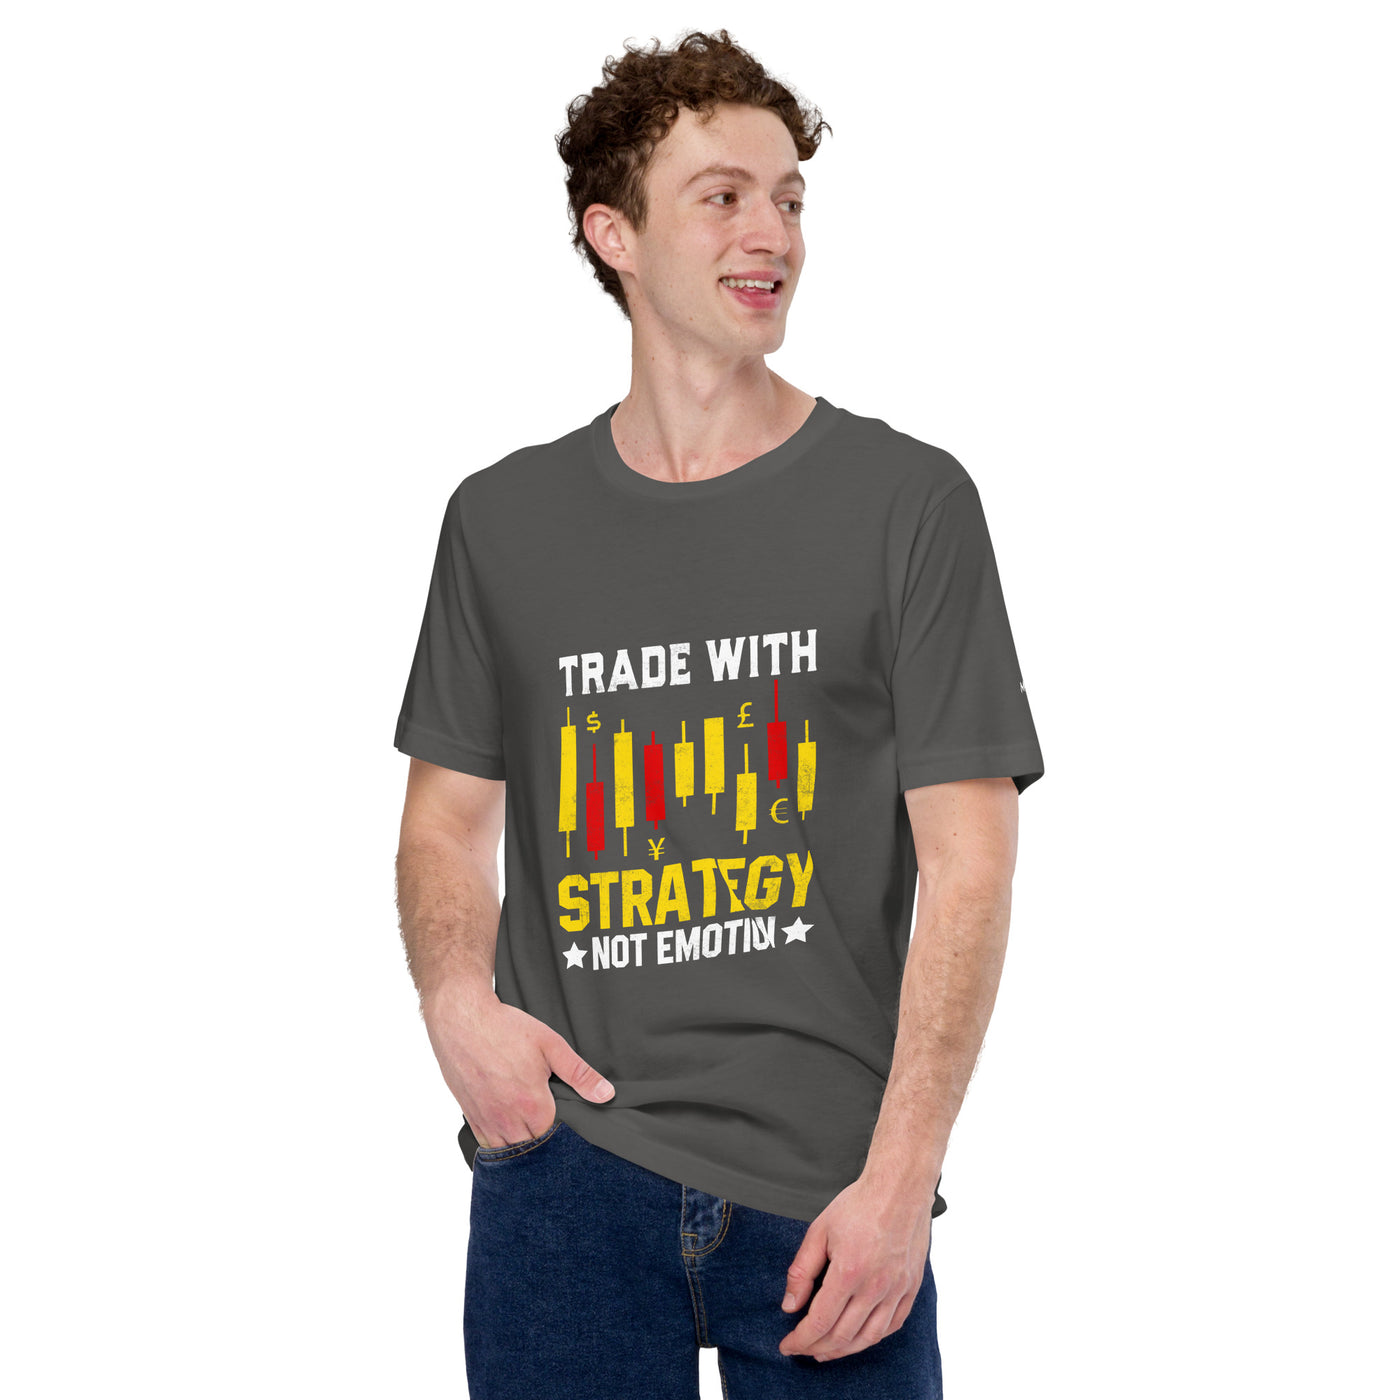 Trade with Strategy not Emotion - Unisex t-shirt